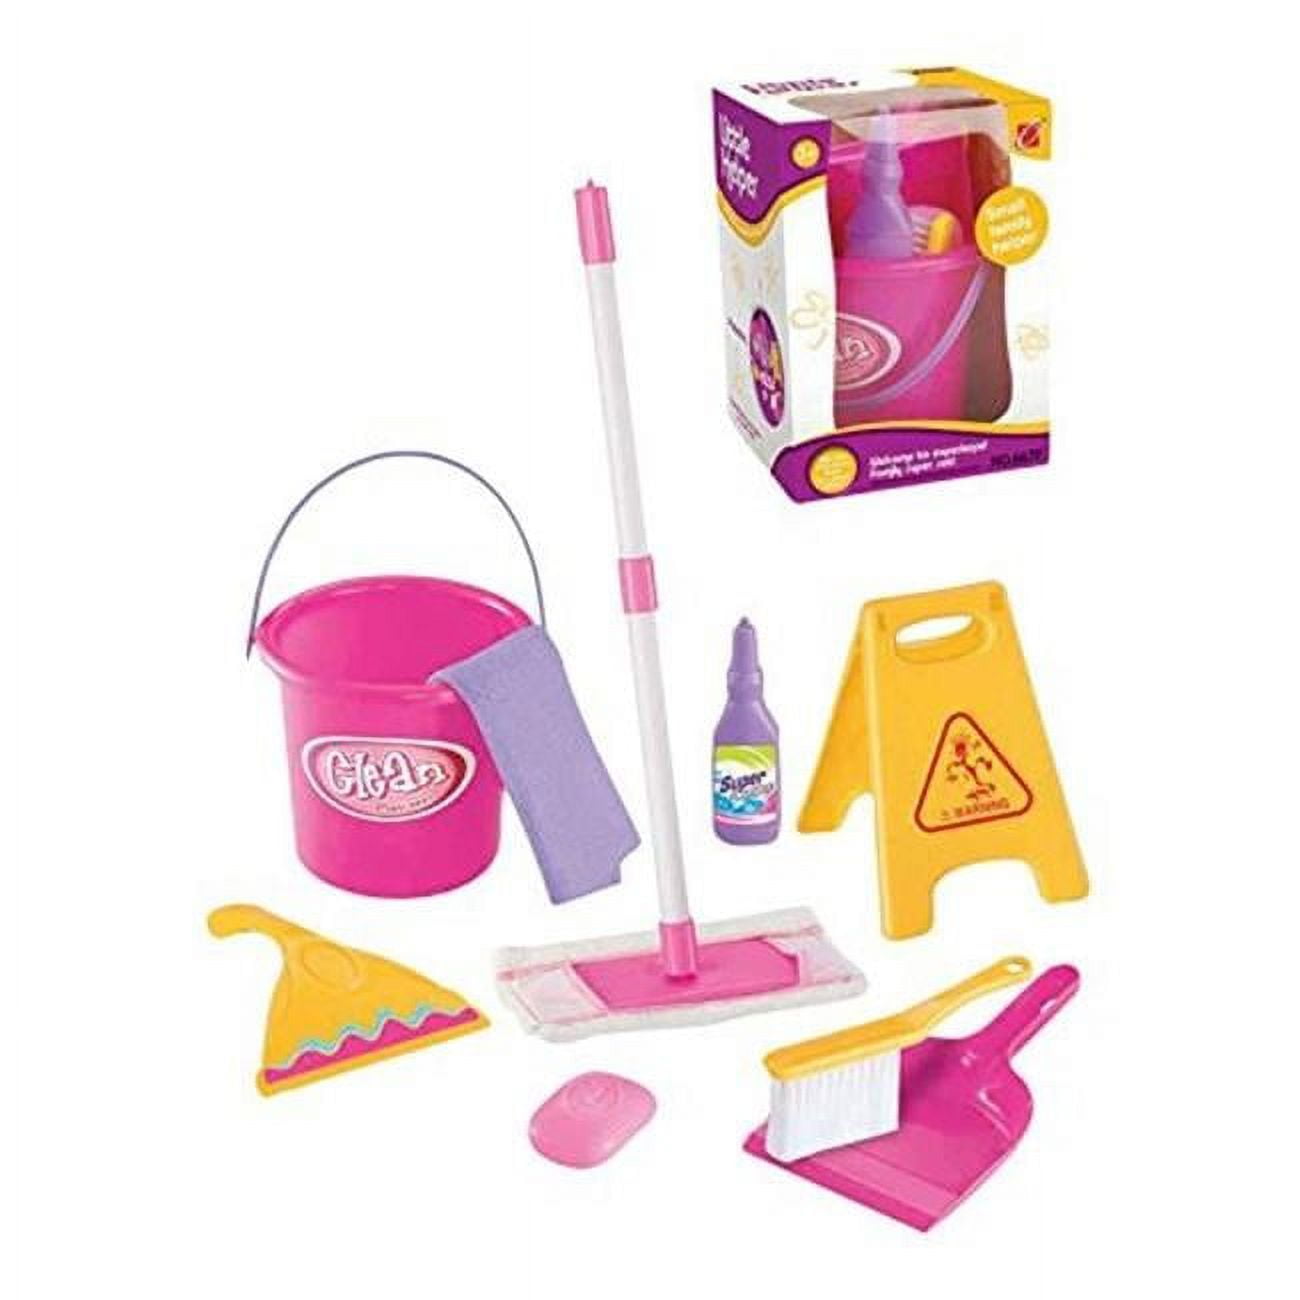 Ps67f Little Helper Pretend Cleaning Toy Play Set